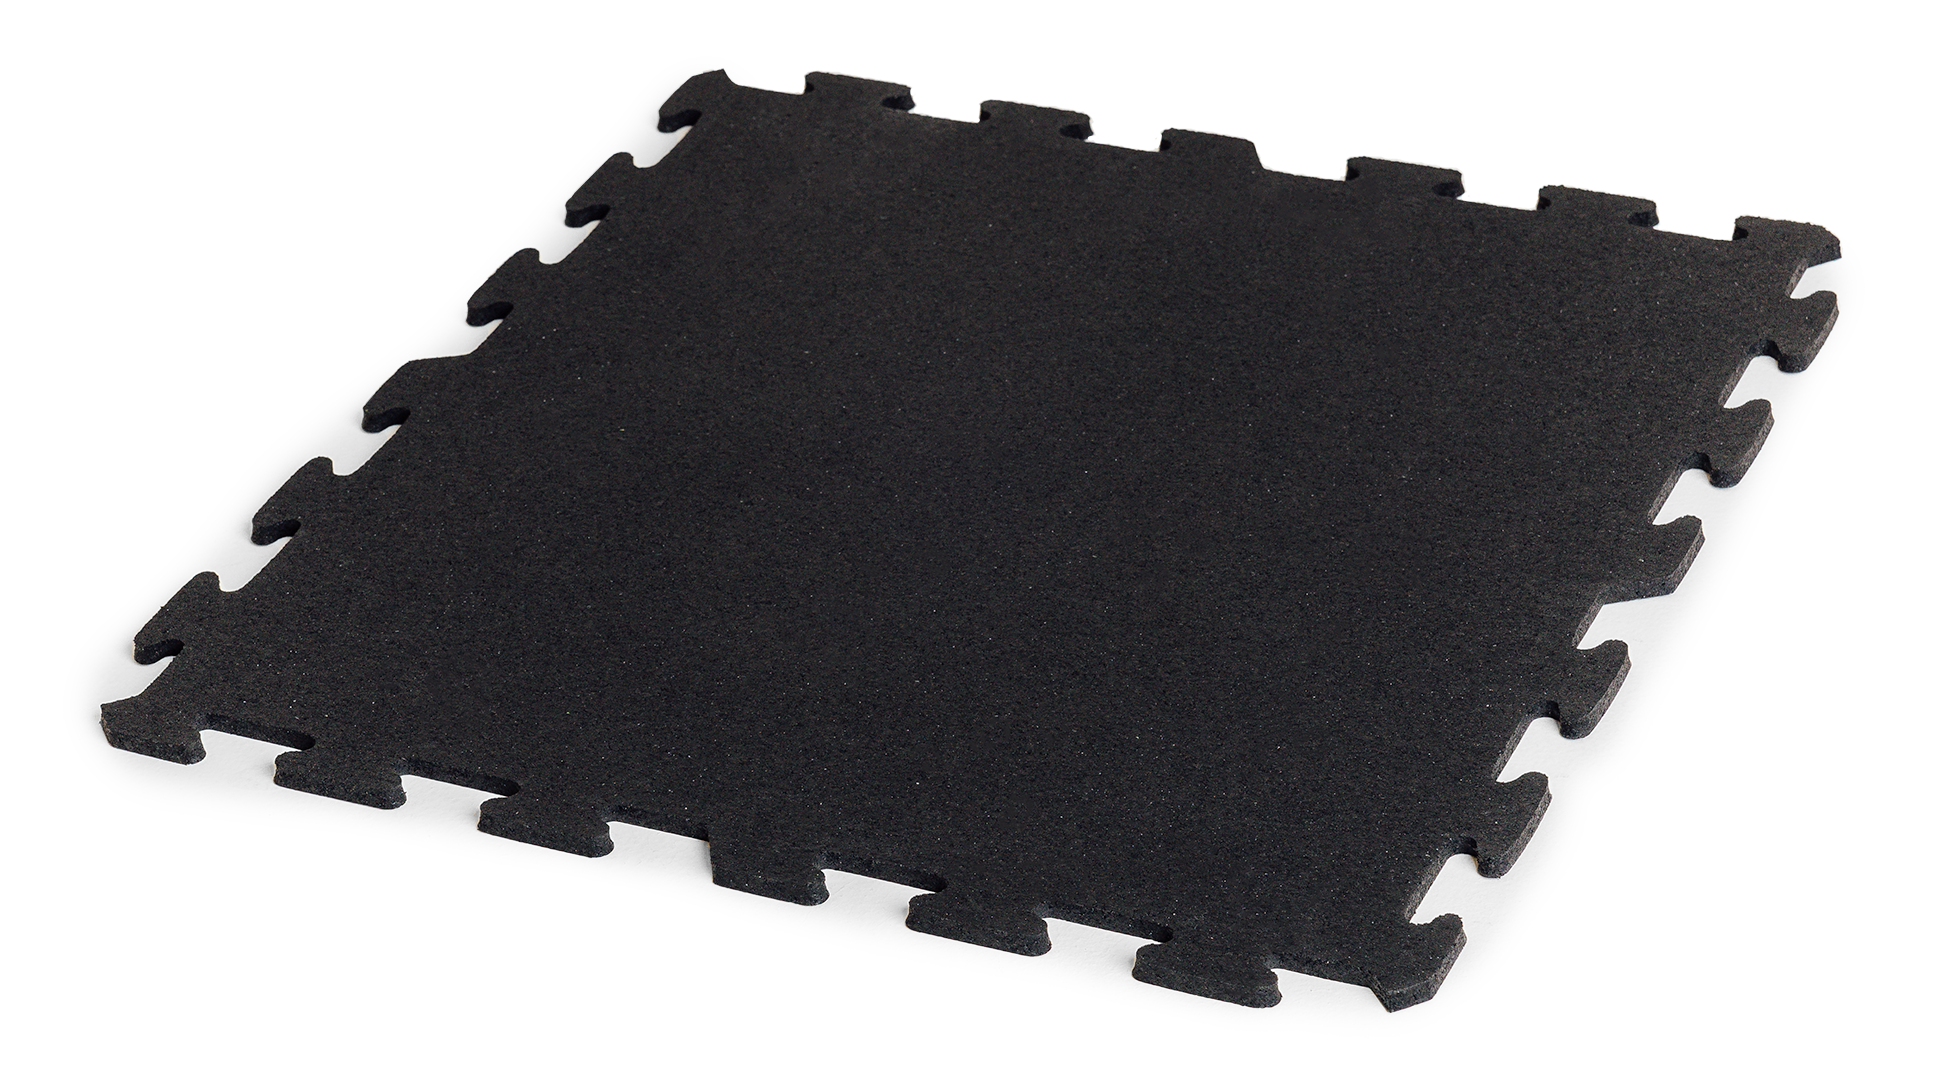 Rogue Fitness Rubber Tile 24x24x1.5 - Crumb Finish - 16 Pack